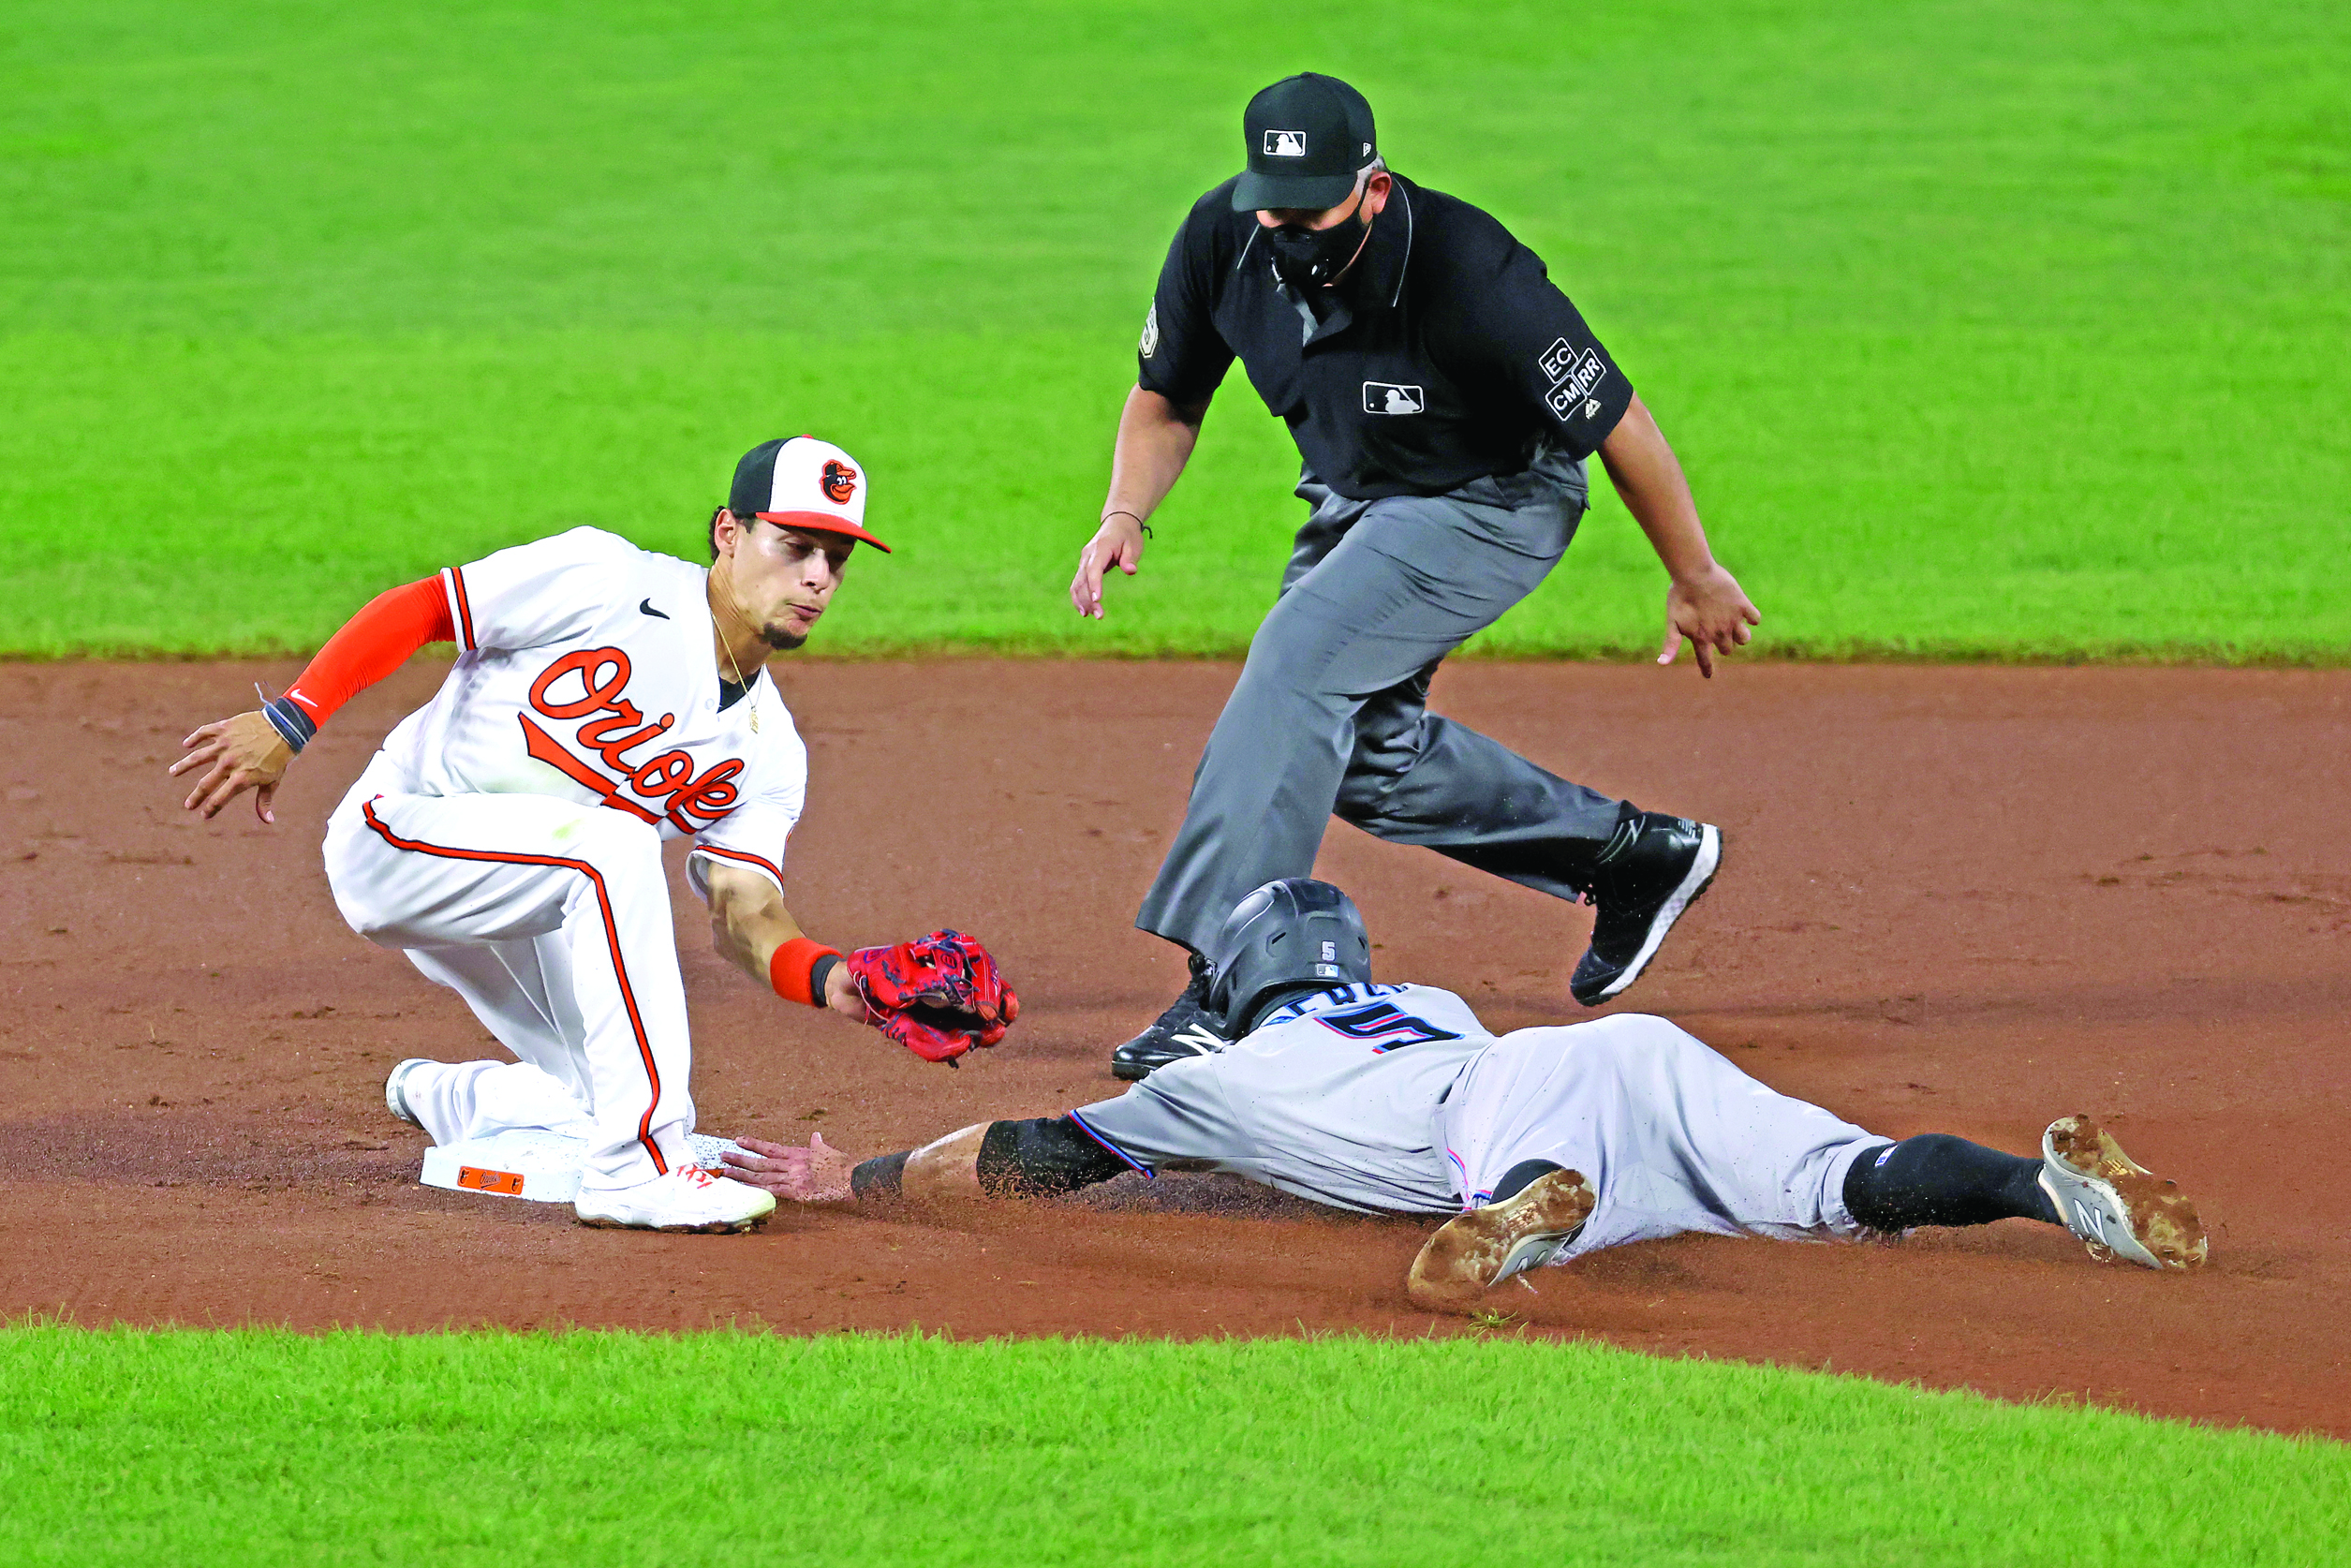 BALTIMORE, MARYLAND - AUGUST 04: Jon Berti #5 of the Miami Marlins steals second base as shortstop Andrew Velazquez #13 of the Baltimore Orioles applies the late tag in the first inning at Oriole Park at Camden Yards on August 04, 2020 in Baltimore, Maryland.   Rob Carr/Getty Images/AFP